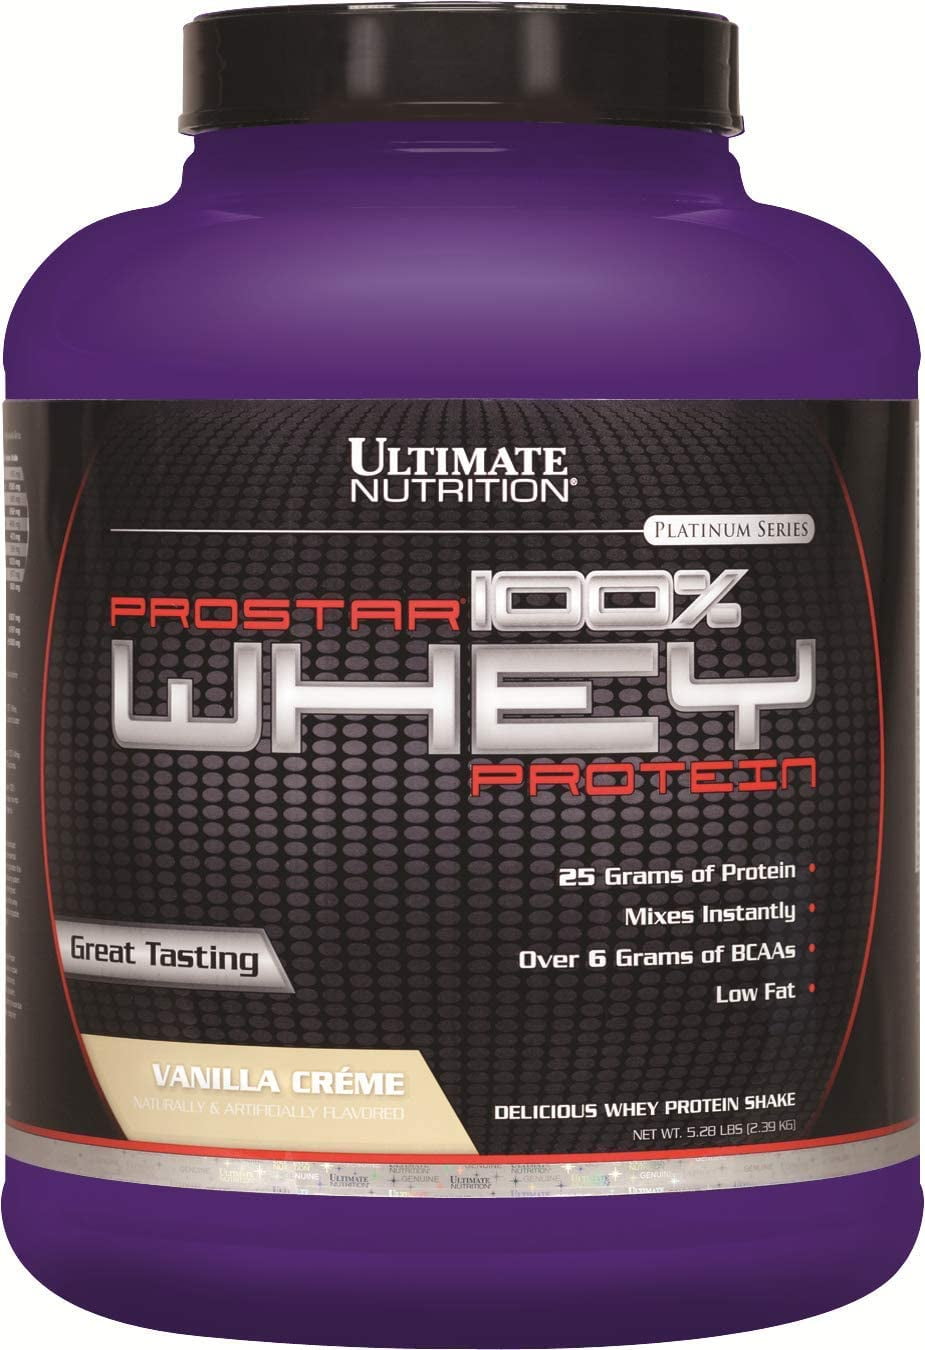 Ultimate Nutrition Prostar Whey Protein Powder, Low Carb Protein Shake with Bcaas,  25 Grams of Protein, Keto Friendly, 5 Pounds, Vanilla Crème